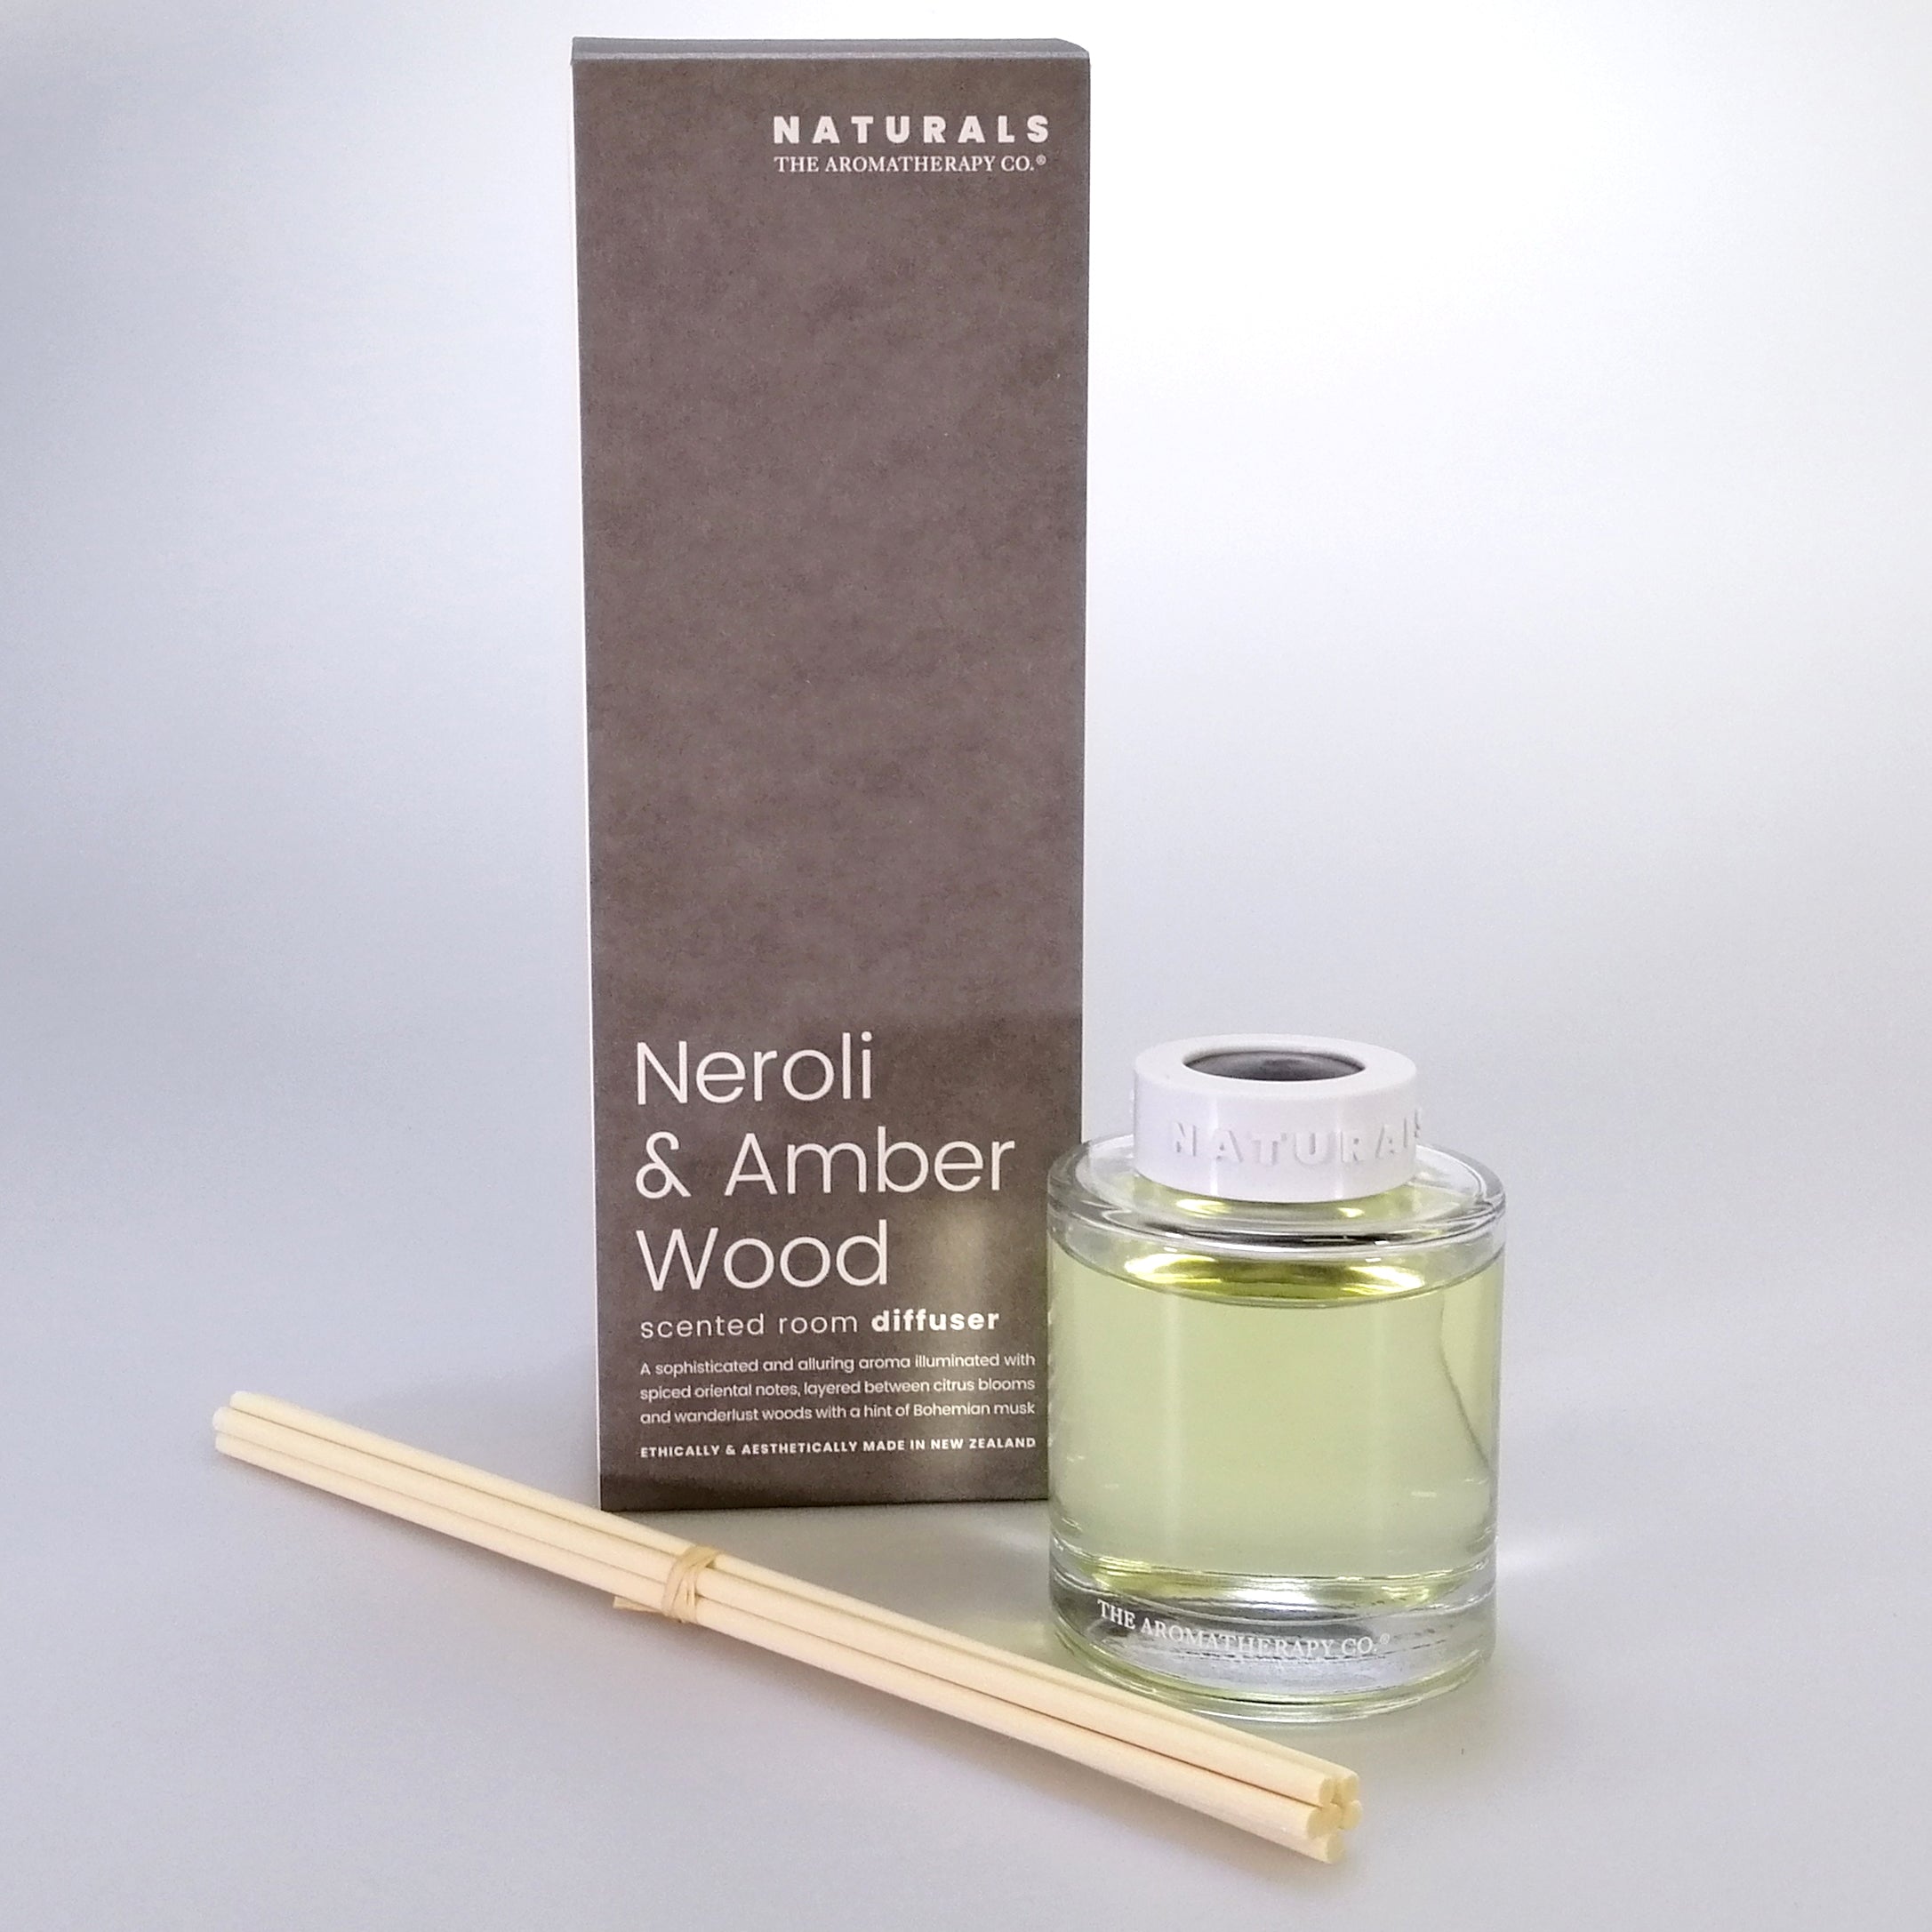 The Aromatherapy Co. Naturals - Neroli & Amber Wood Diffuser